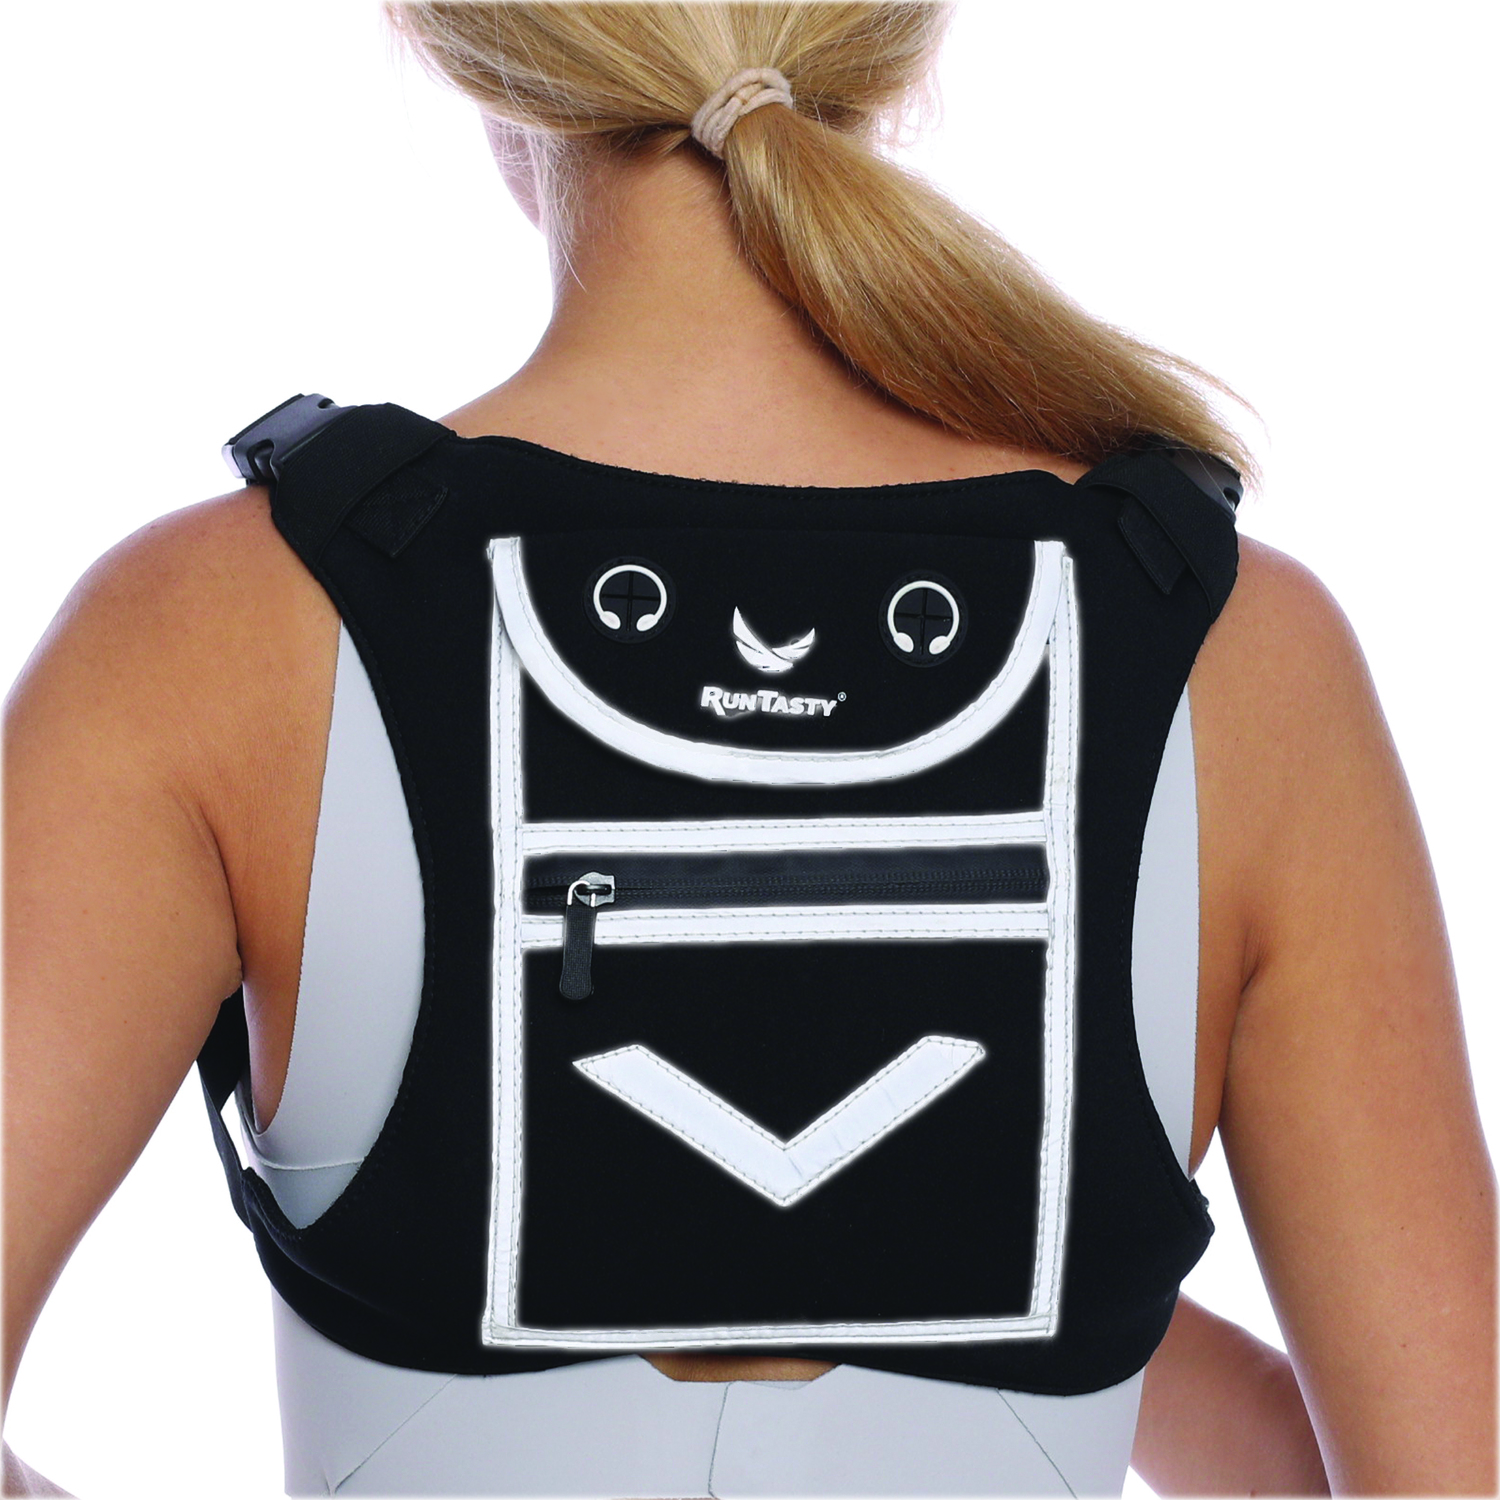 Running Reflective Mini-Backpack Vest for Men &amp; Women. Holds accesories, any iPhone, Android Phone or Ipad Mini! Ideal for Hands-Free Running, Fitness, Cycling, Hiking and more!